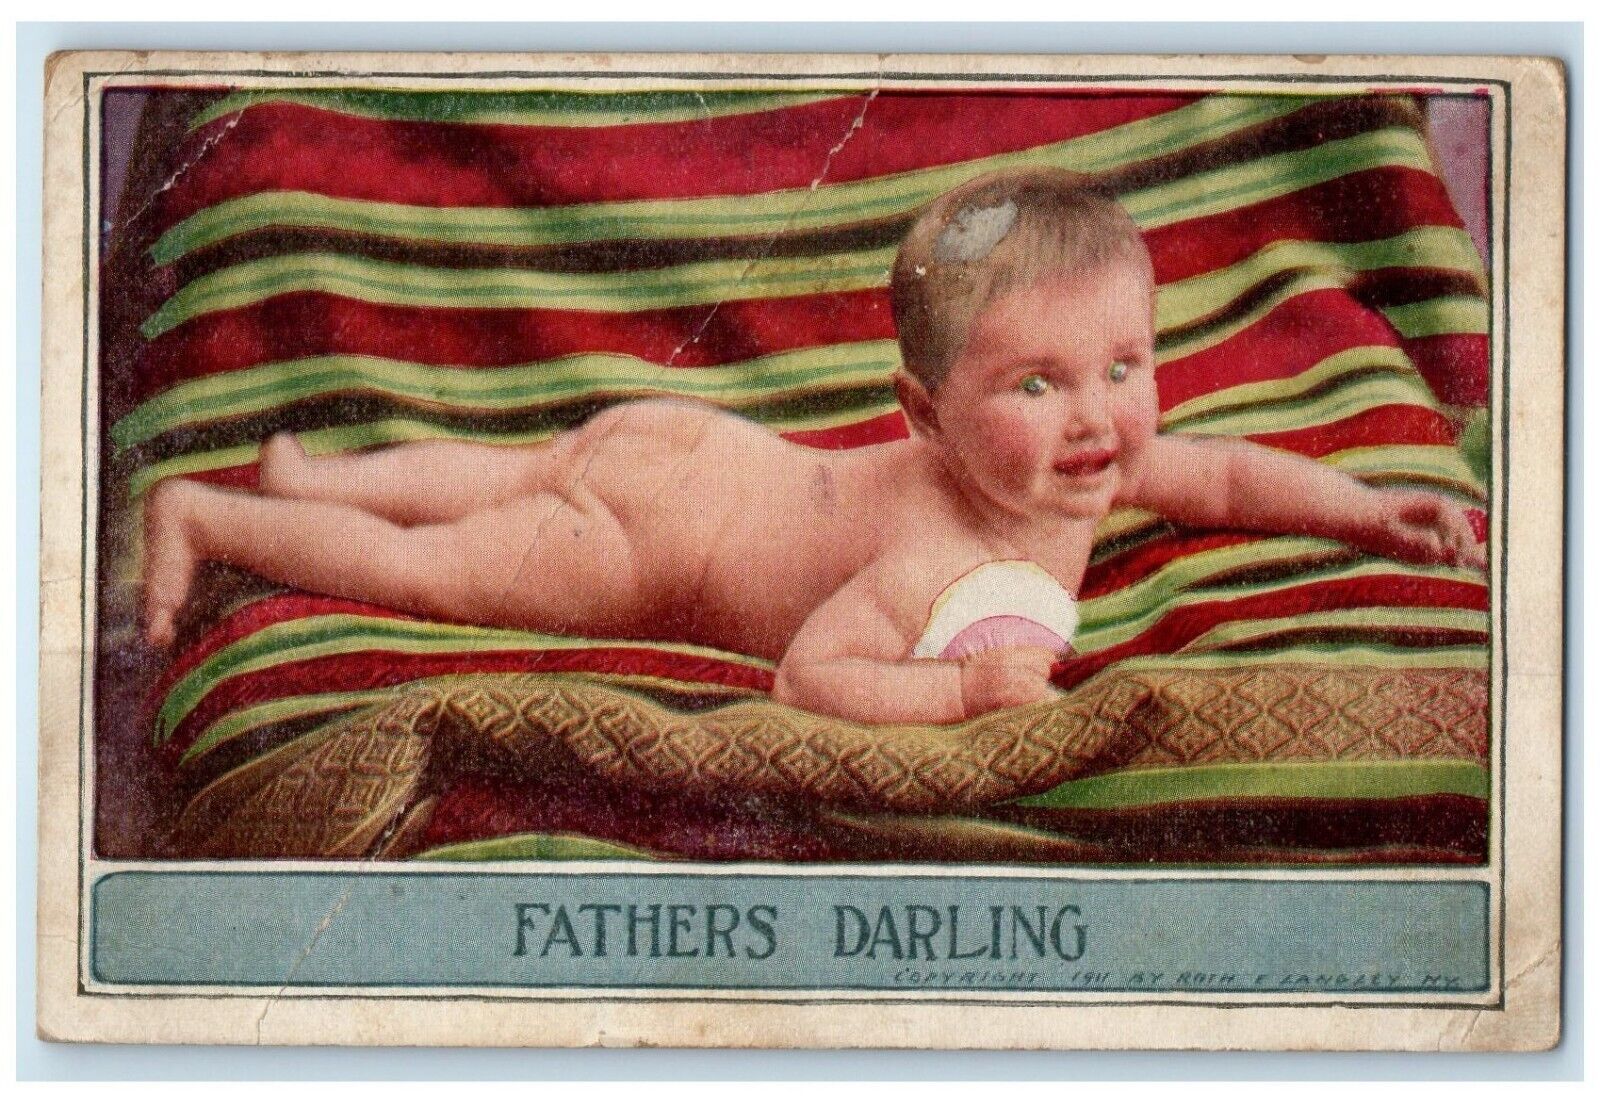 c1910's Cute Baby Toddler Undressed Fathers Darling Posted Antique Postcard